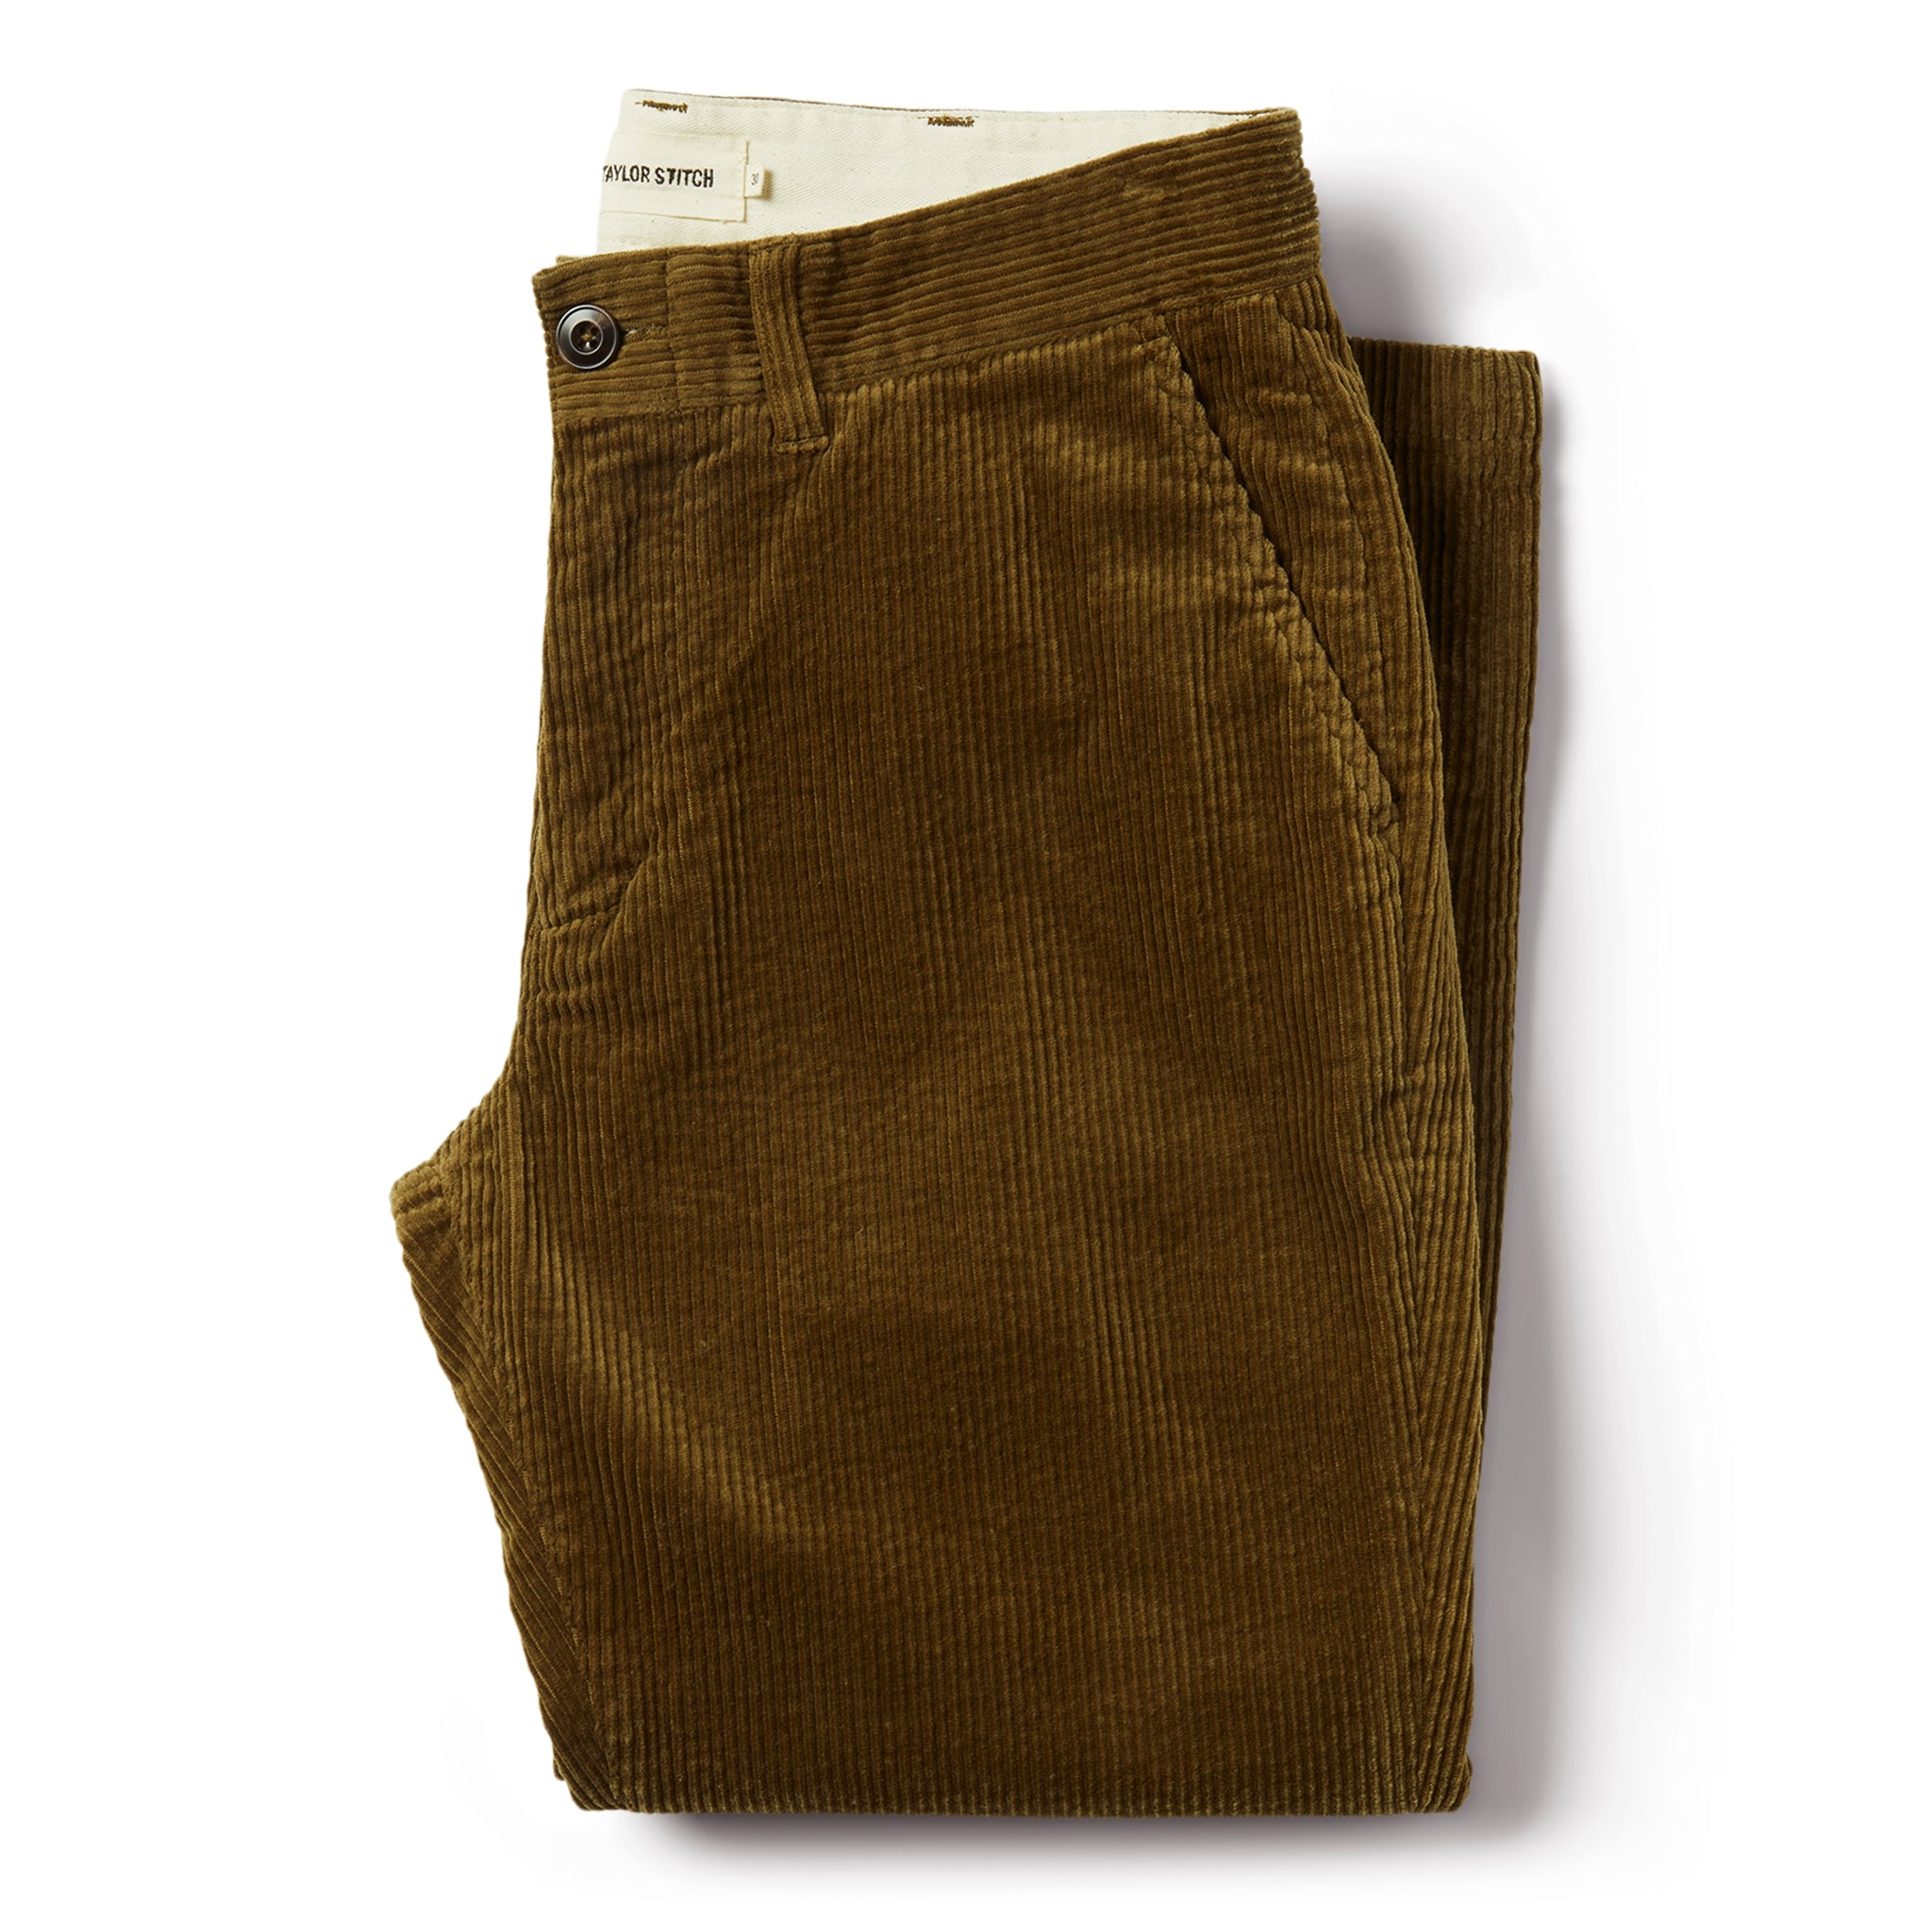 Taylor Stitch Slim Foundation Pant in Olive Cord - Earl's Authentics